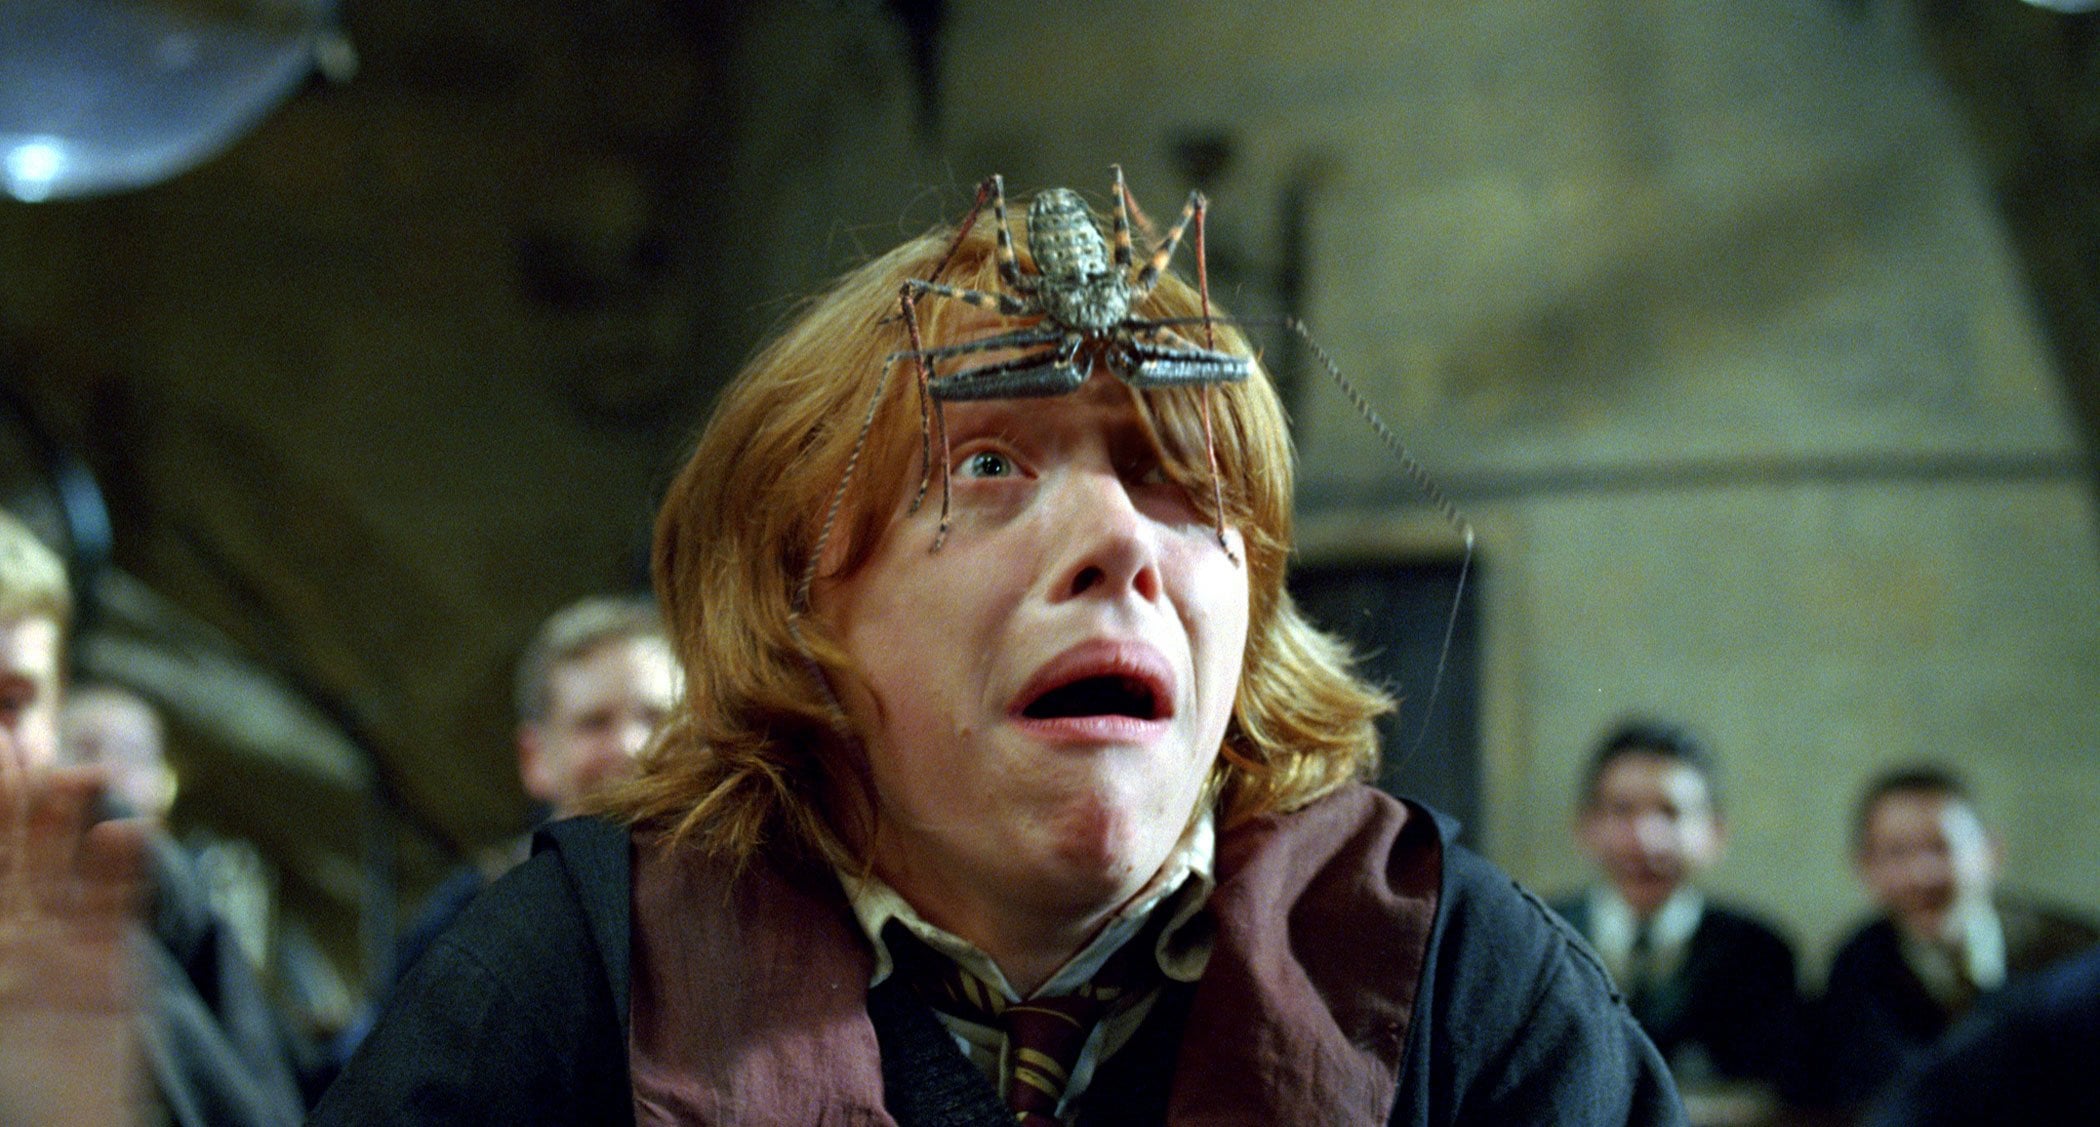 This is what Rupert Grint does best, and he’s bringing that talent to Apple TV.